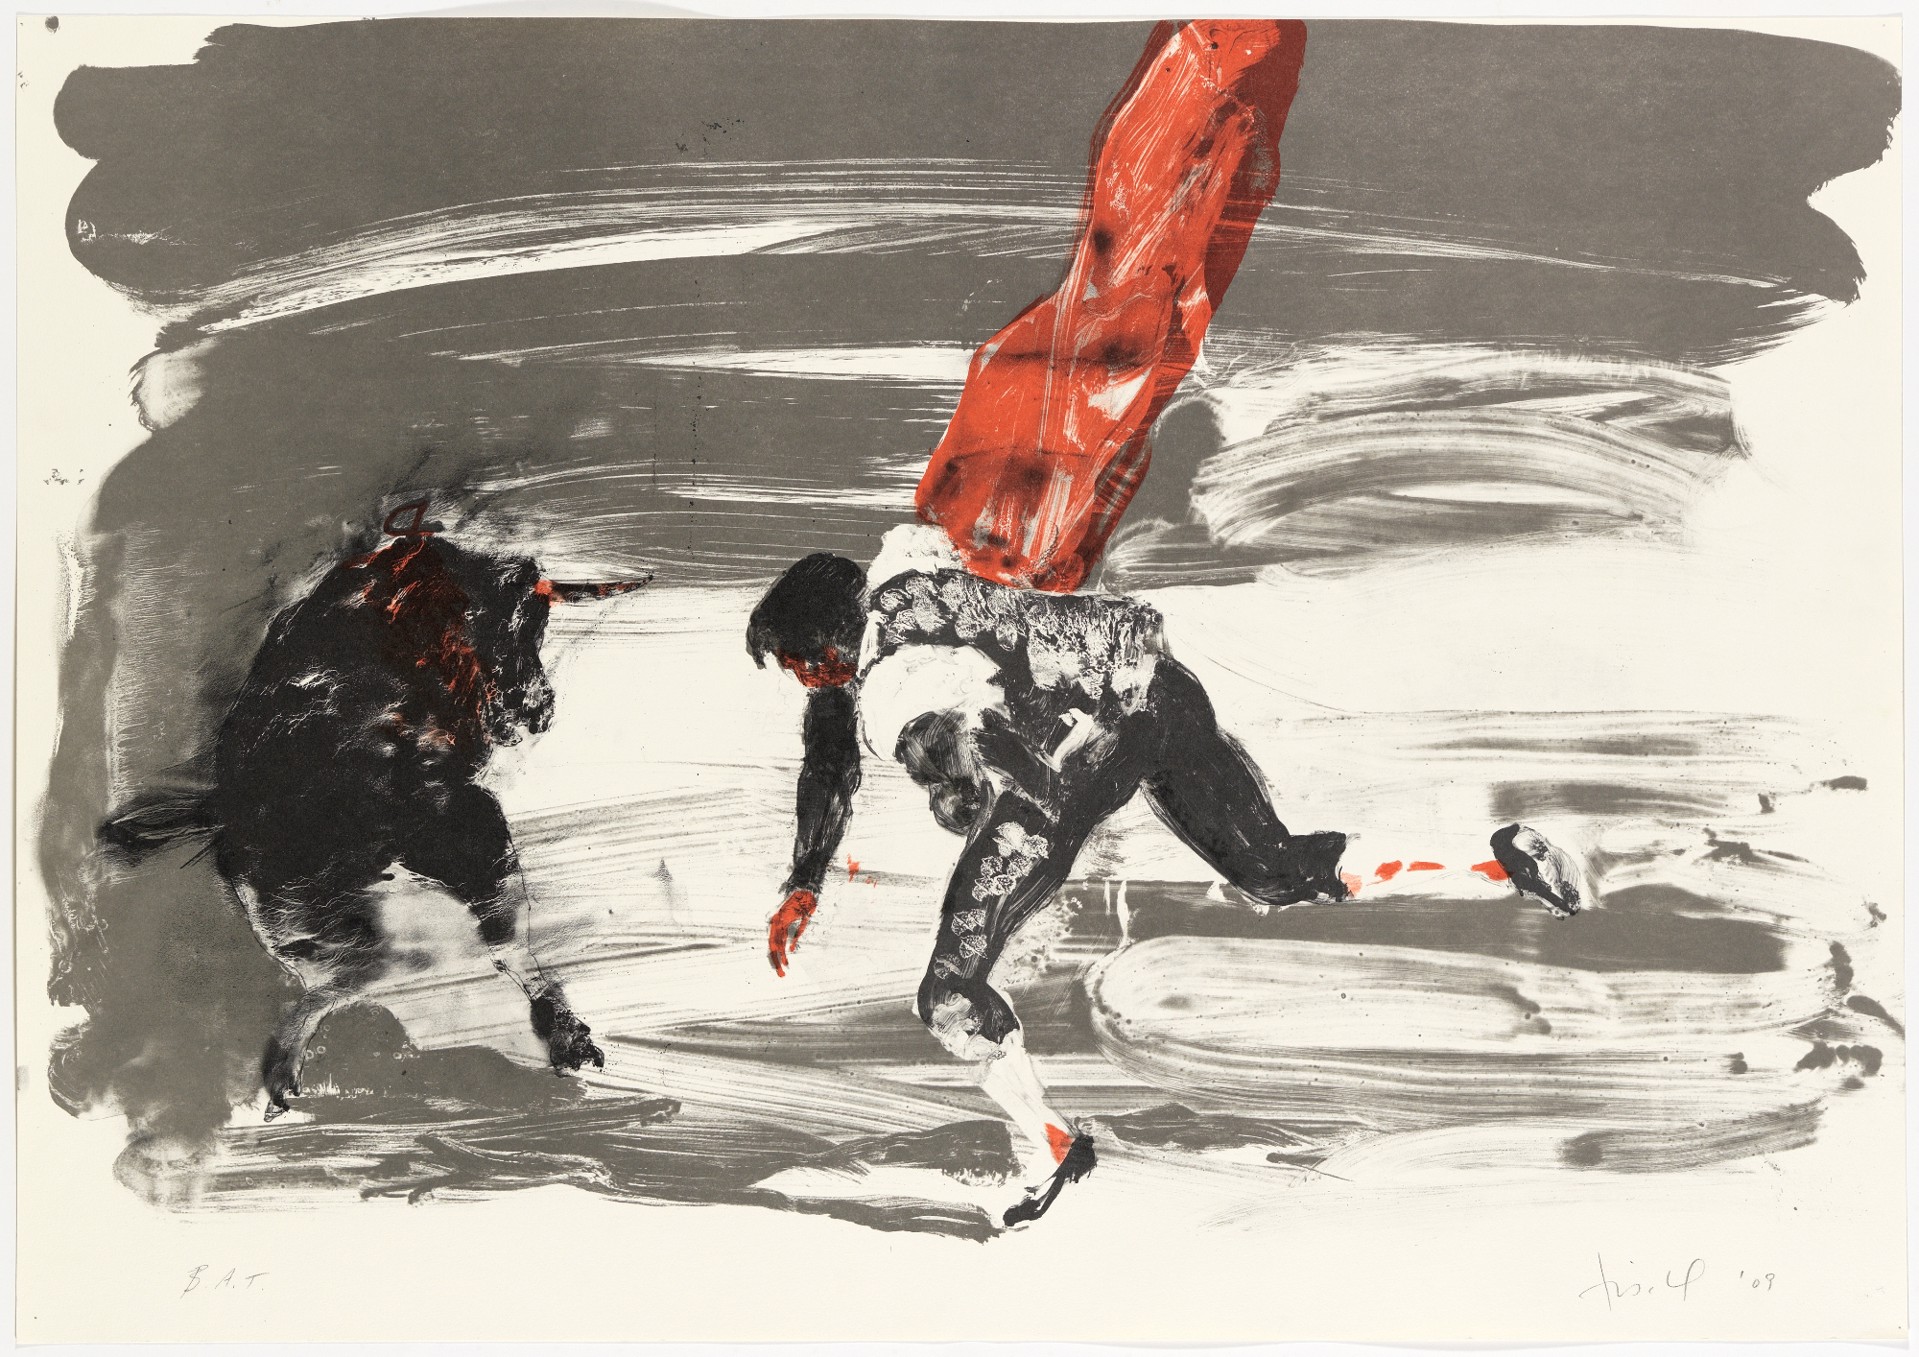 Untitled #2 by Eric Fischl